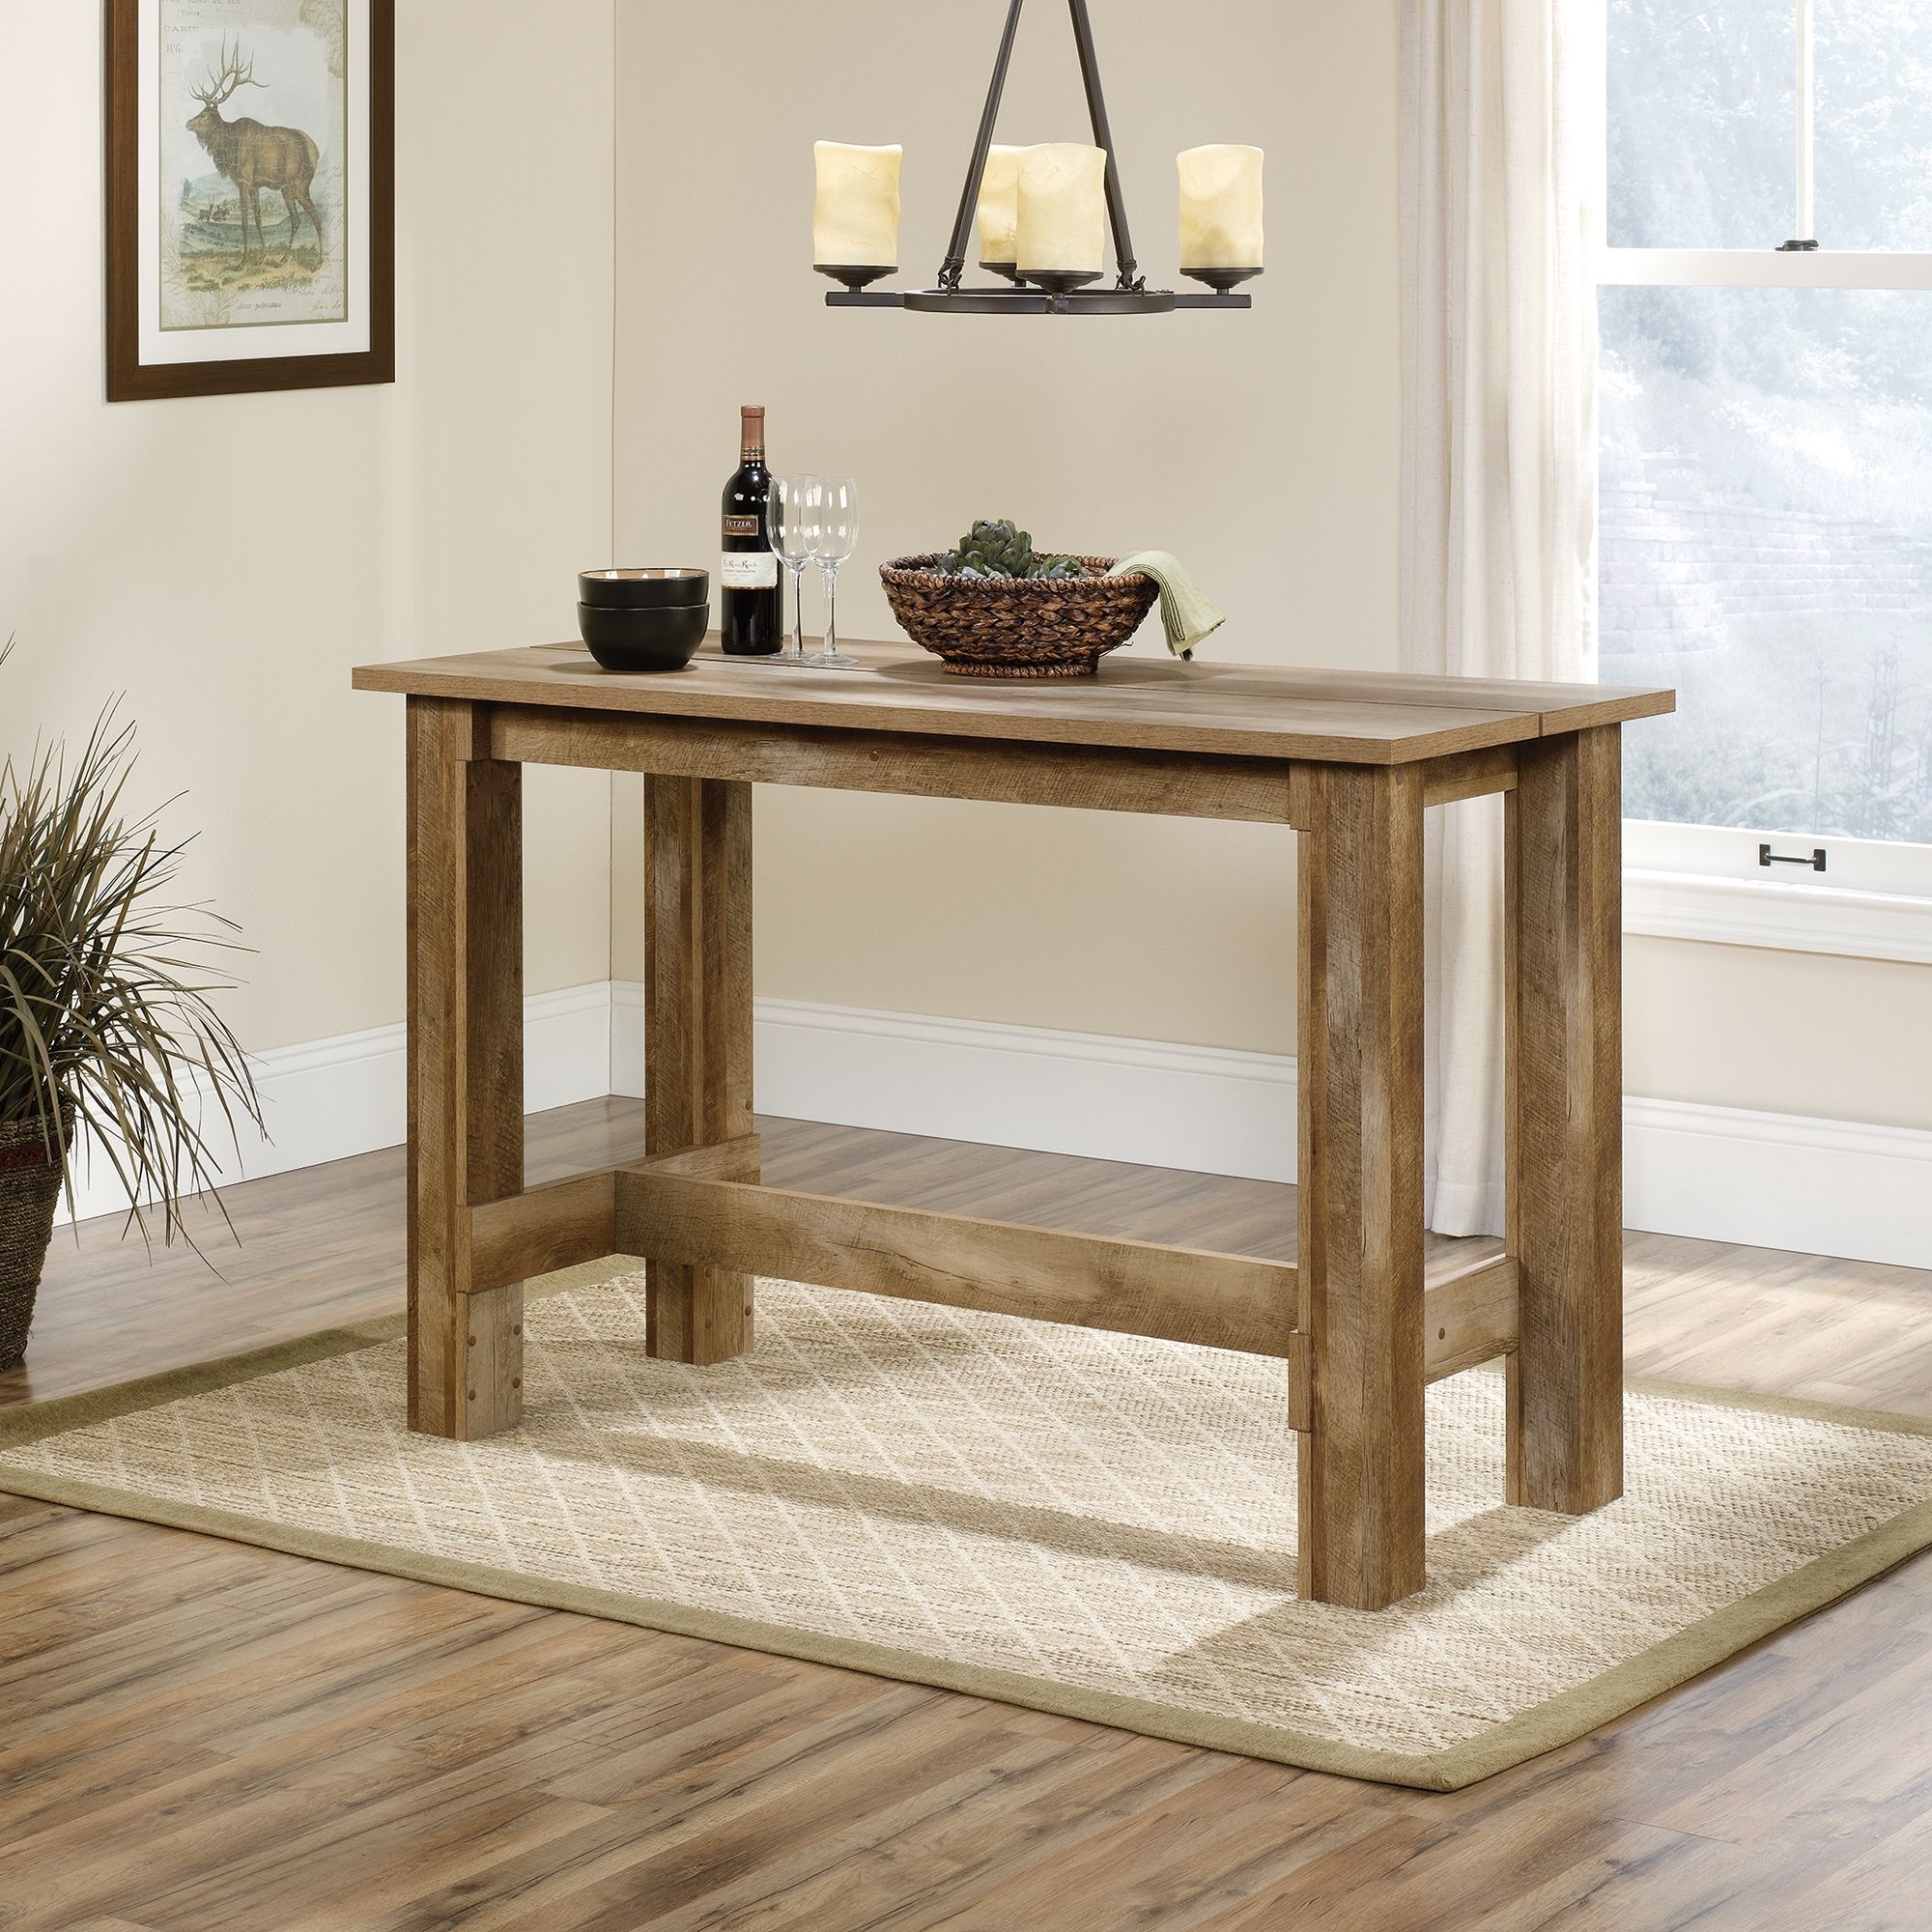 Boone Mountain Counter  Height Dinette Table (416698) – Sauder Throughout Most Recently Released Craftsman 9 Piece Extension Dining Sets (View 11 of 20)